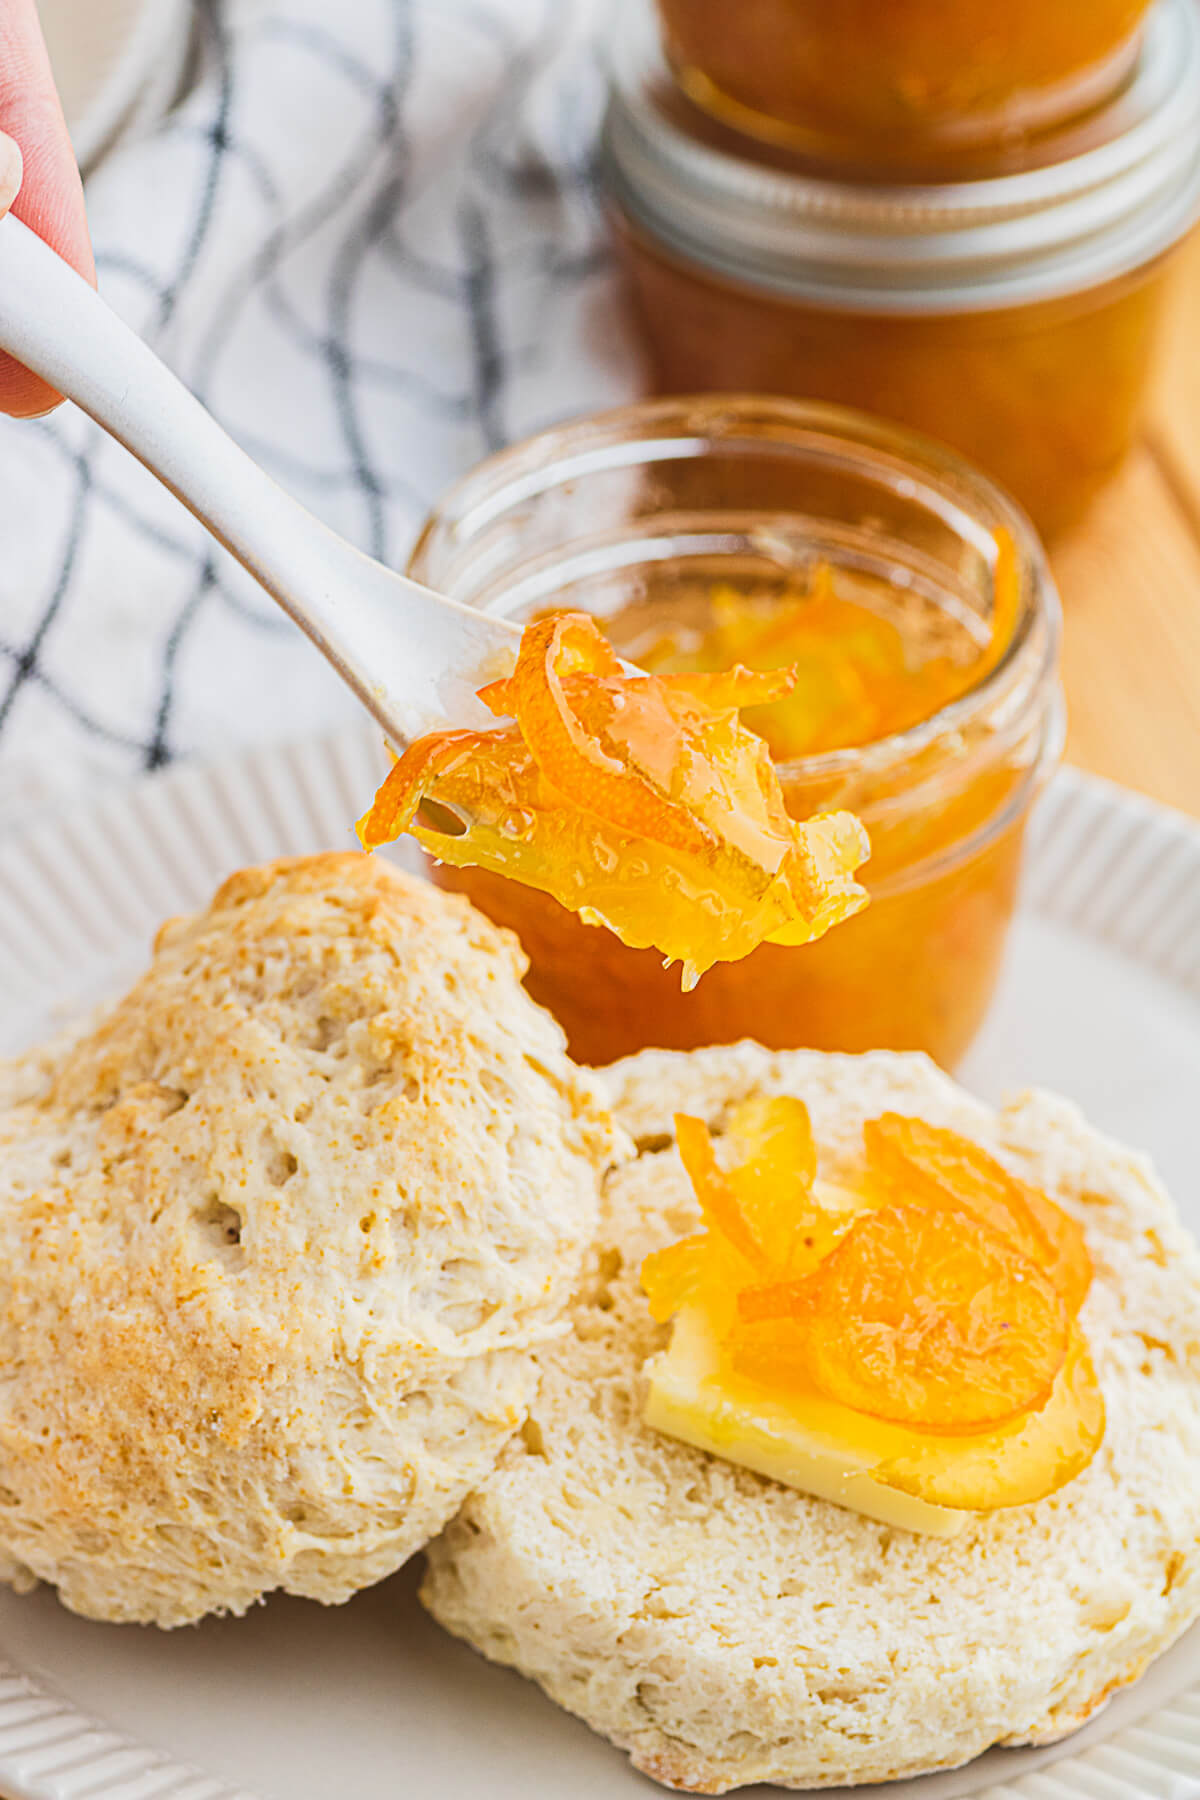 A small spoon of Kumquat Marmalade over a biscuit topped with more marmalade.